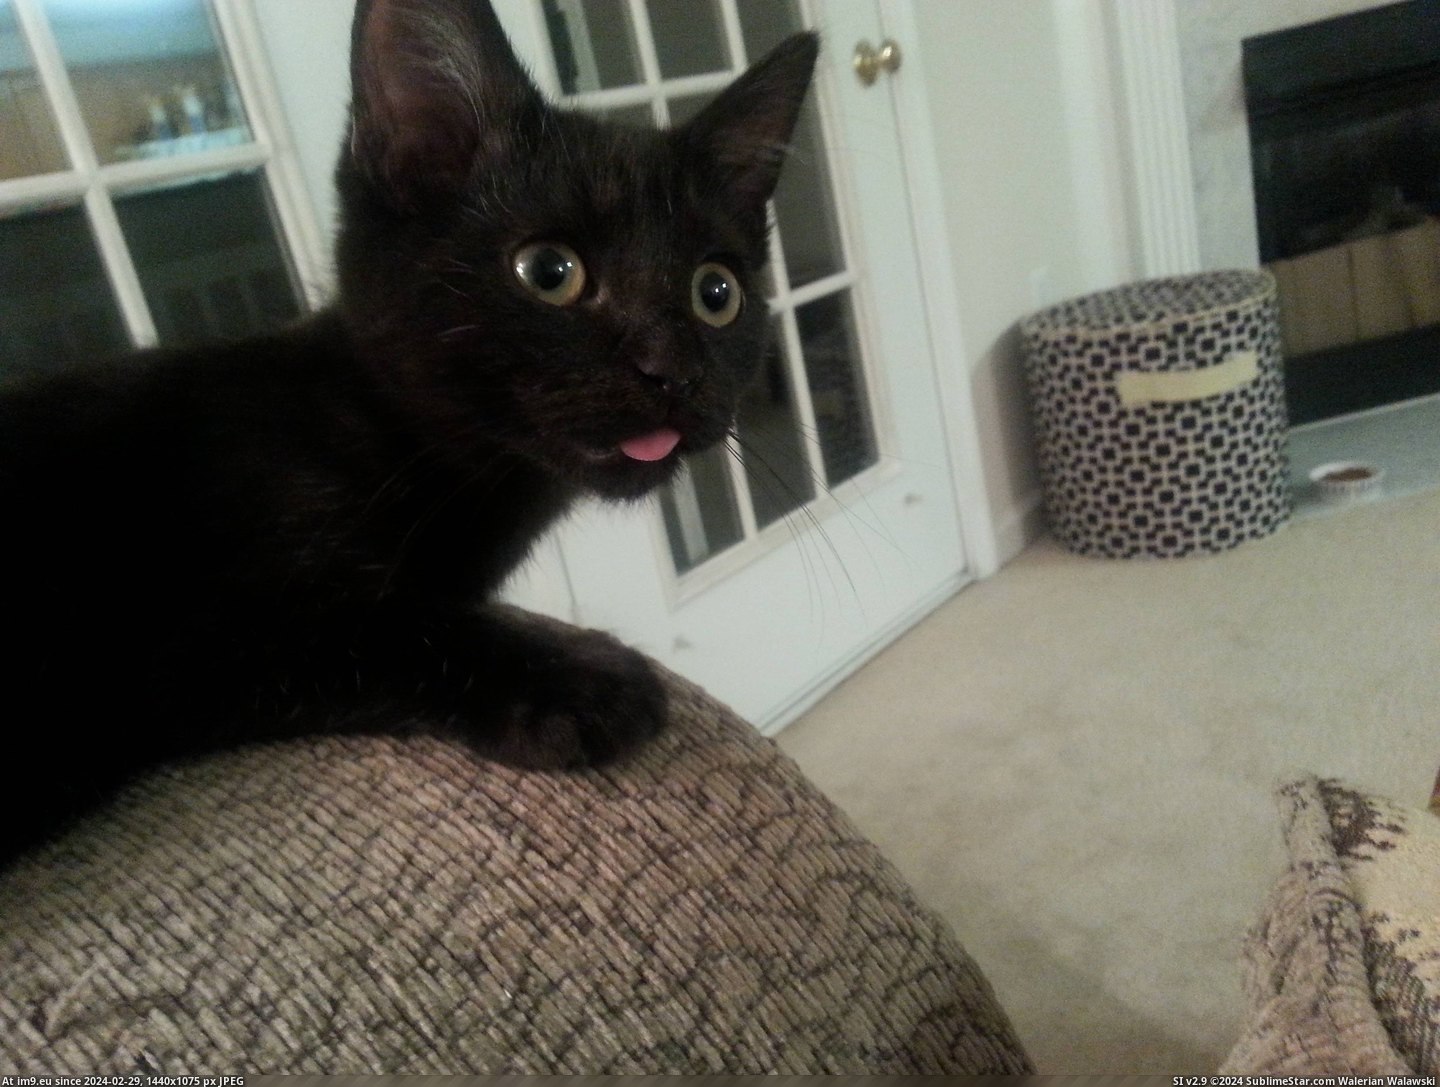 #Kitten #Tongue #Complete #Did [Aww] My kitten did this with his tongue and now I am complete. Pic. (Image of album My r/AWW favs))